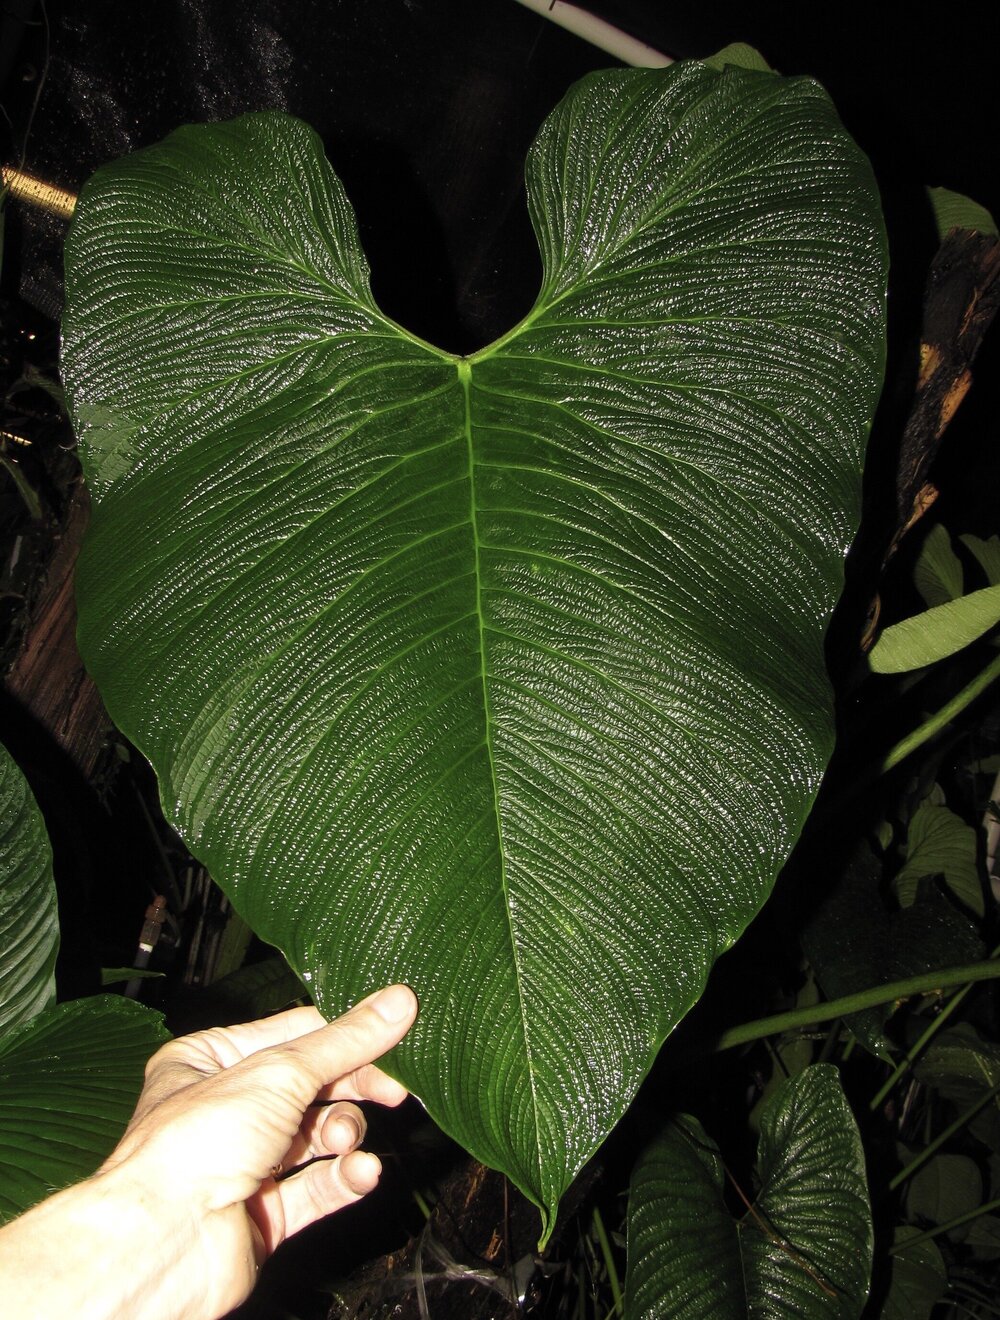 Youngleaf Com - Jay Vannini on velute and satin-leafed Philodendron species in nature and  cultivation with notes on care in home and greenhouse. â€” Exotica Esoterica